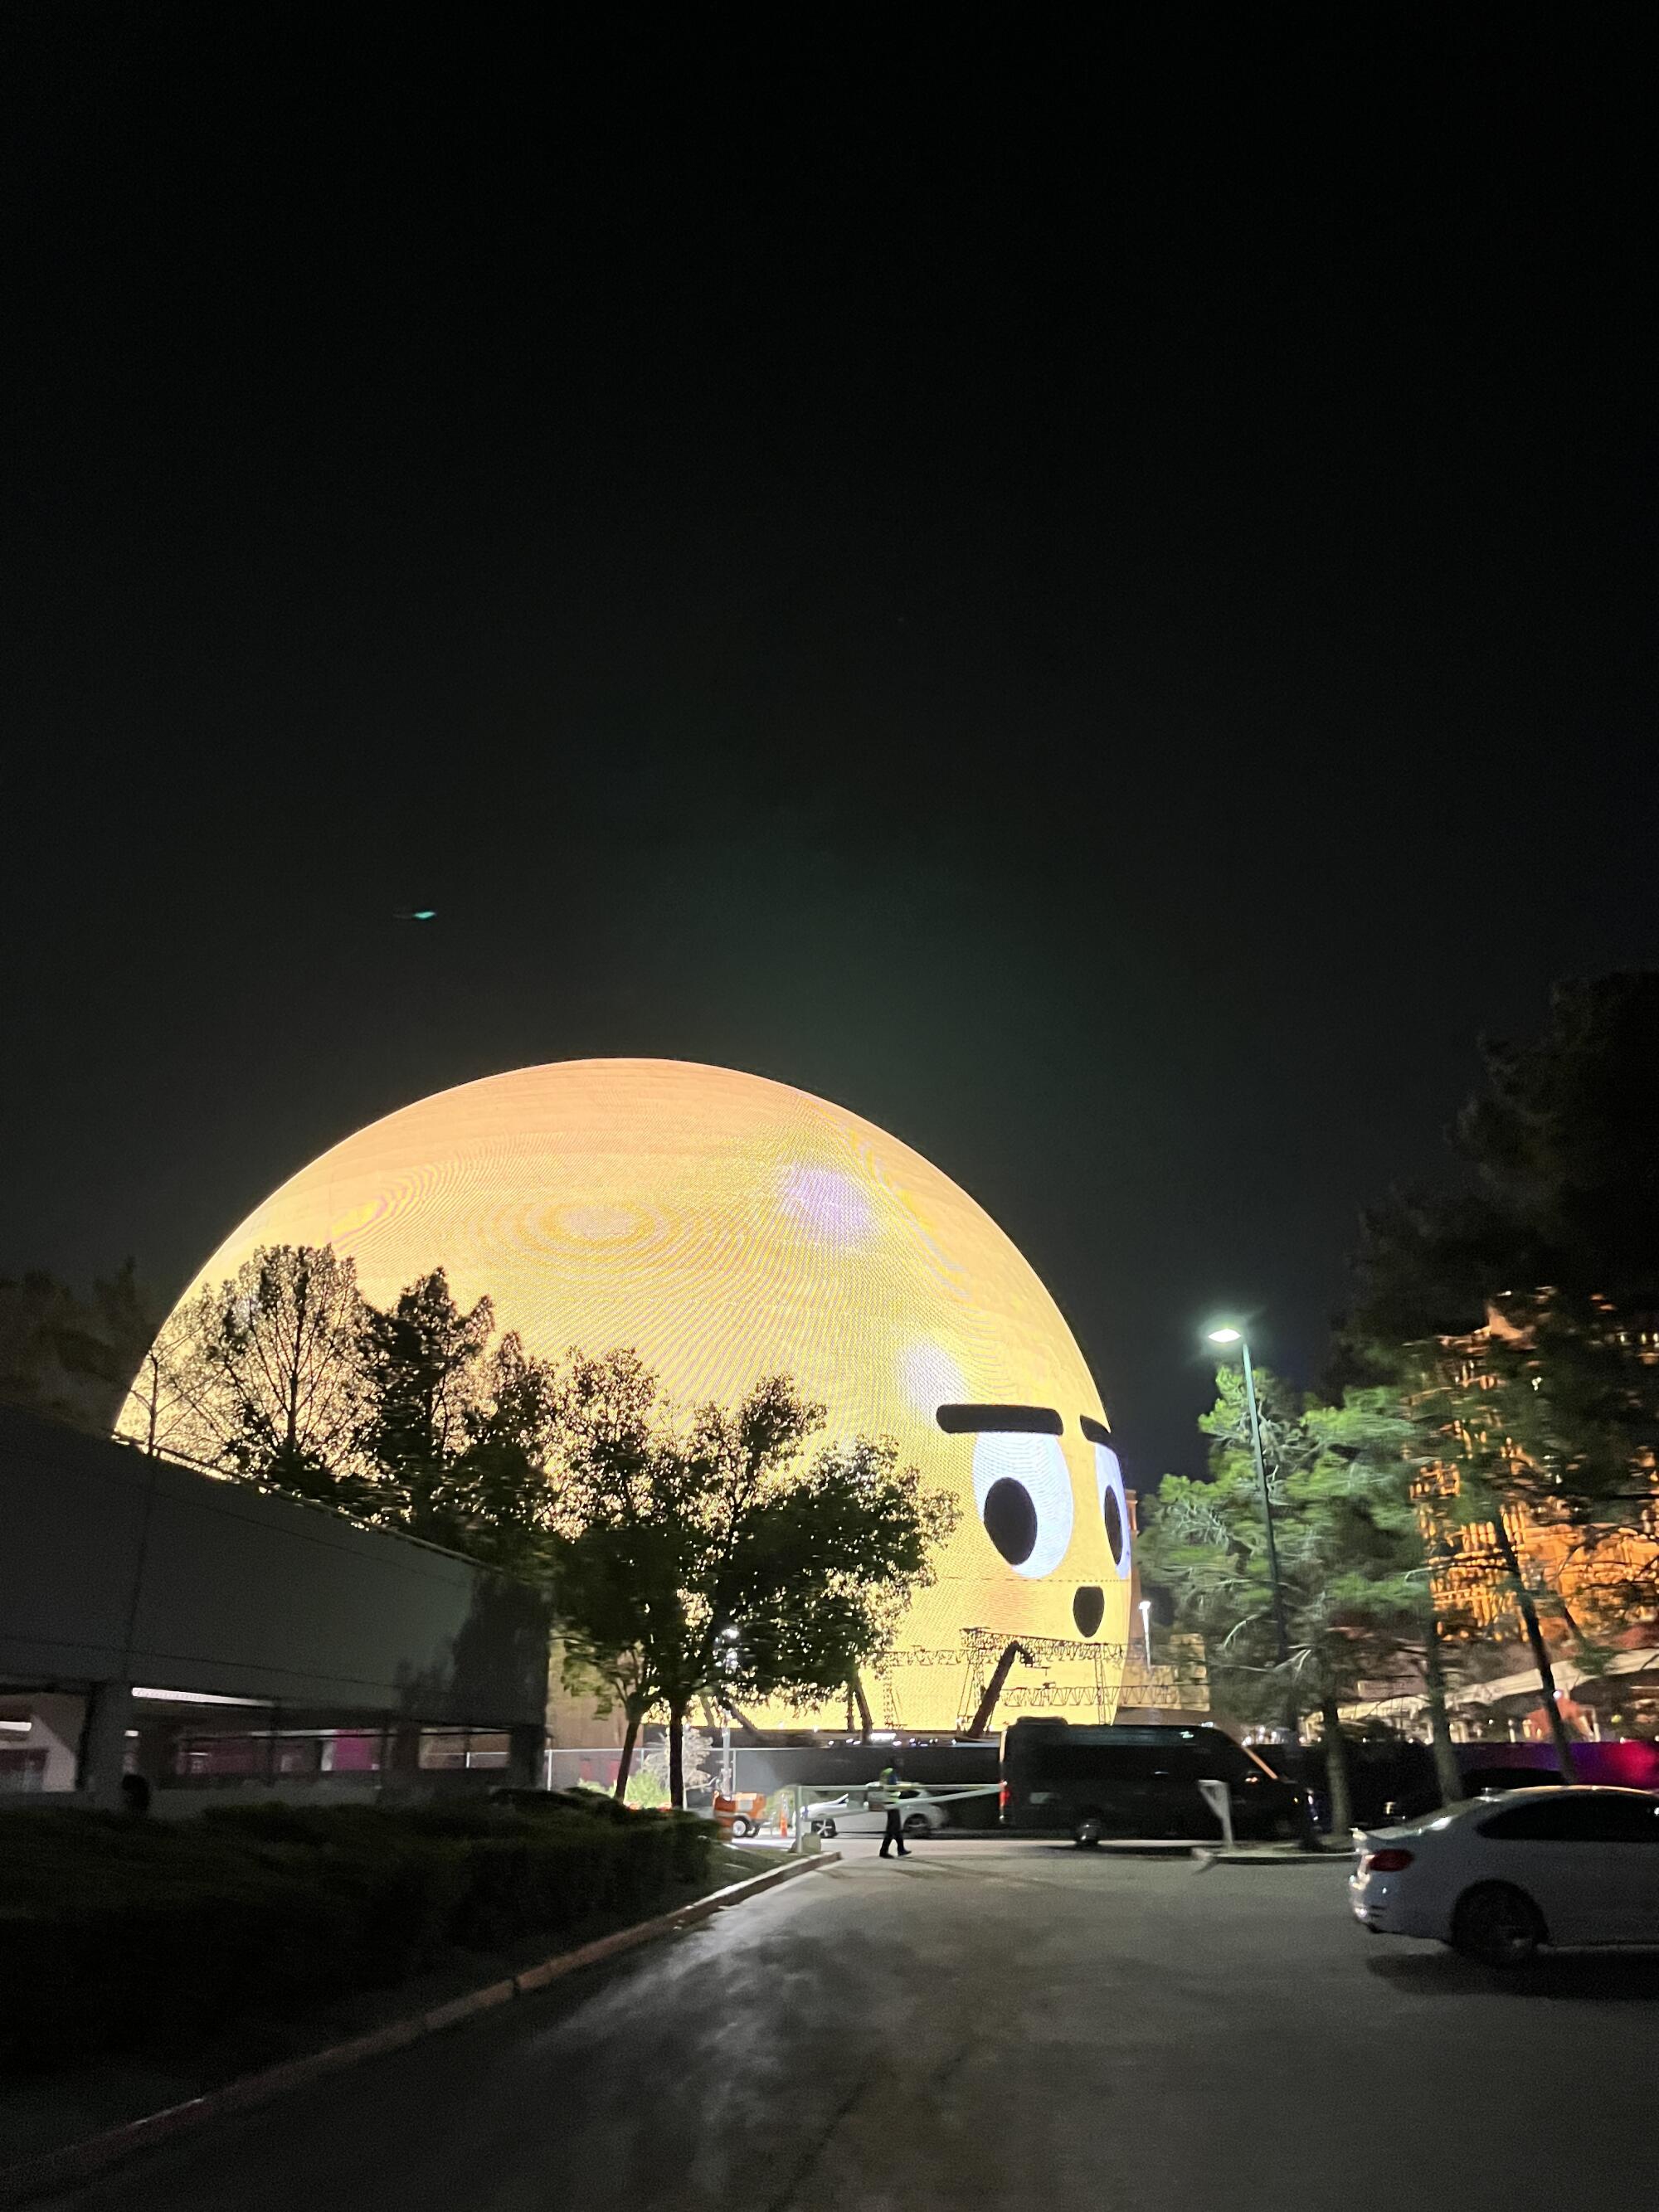 A spherical building covered in LED light is illuminated to resembled a bright yellow emoticon expressing surprise.